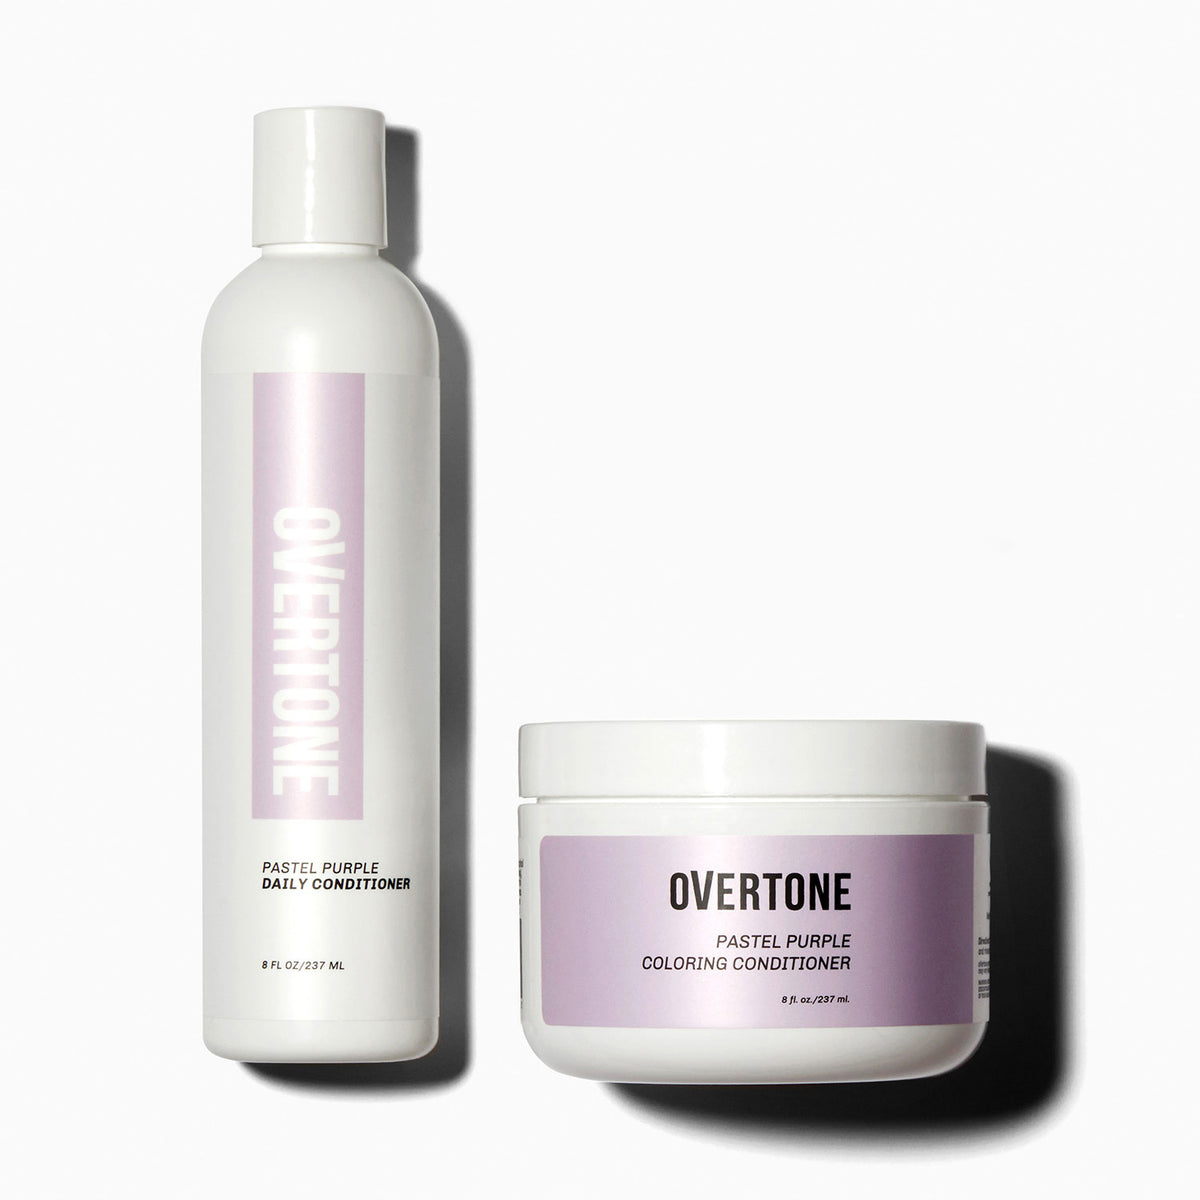 oVertone Pastel Purple Hair Coloring Conditioner and Daily Conditioner 